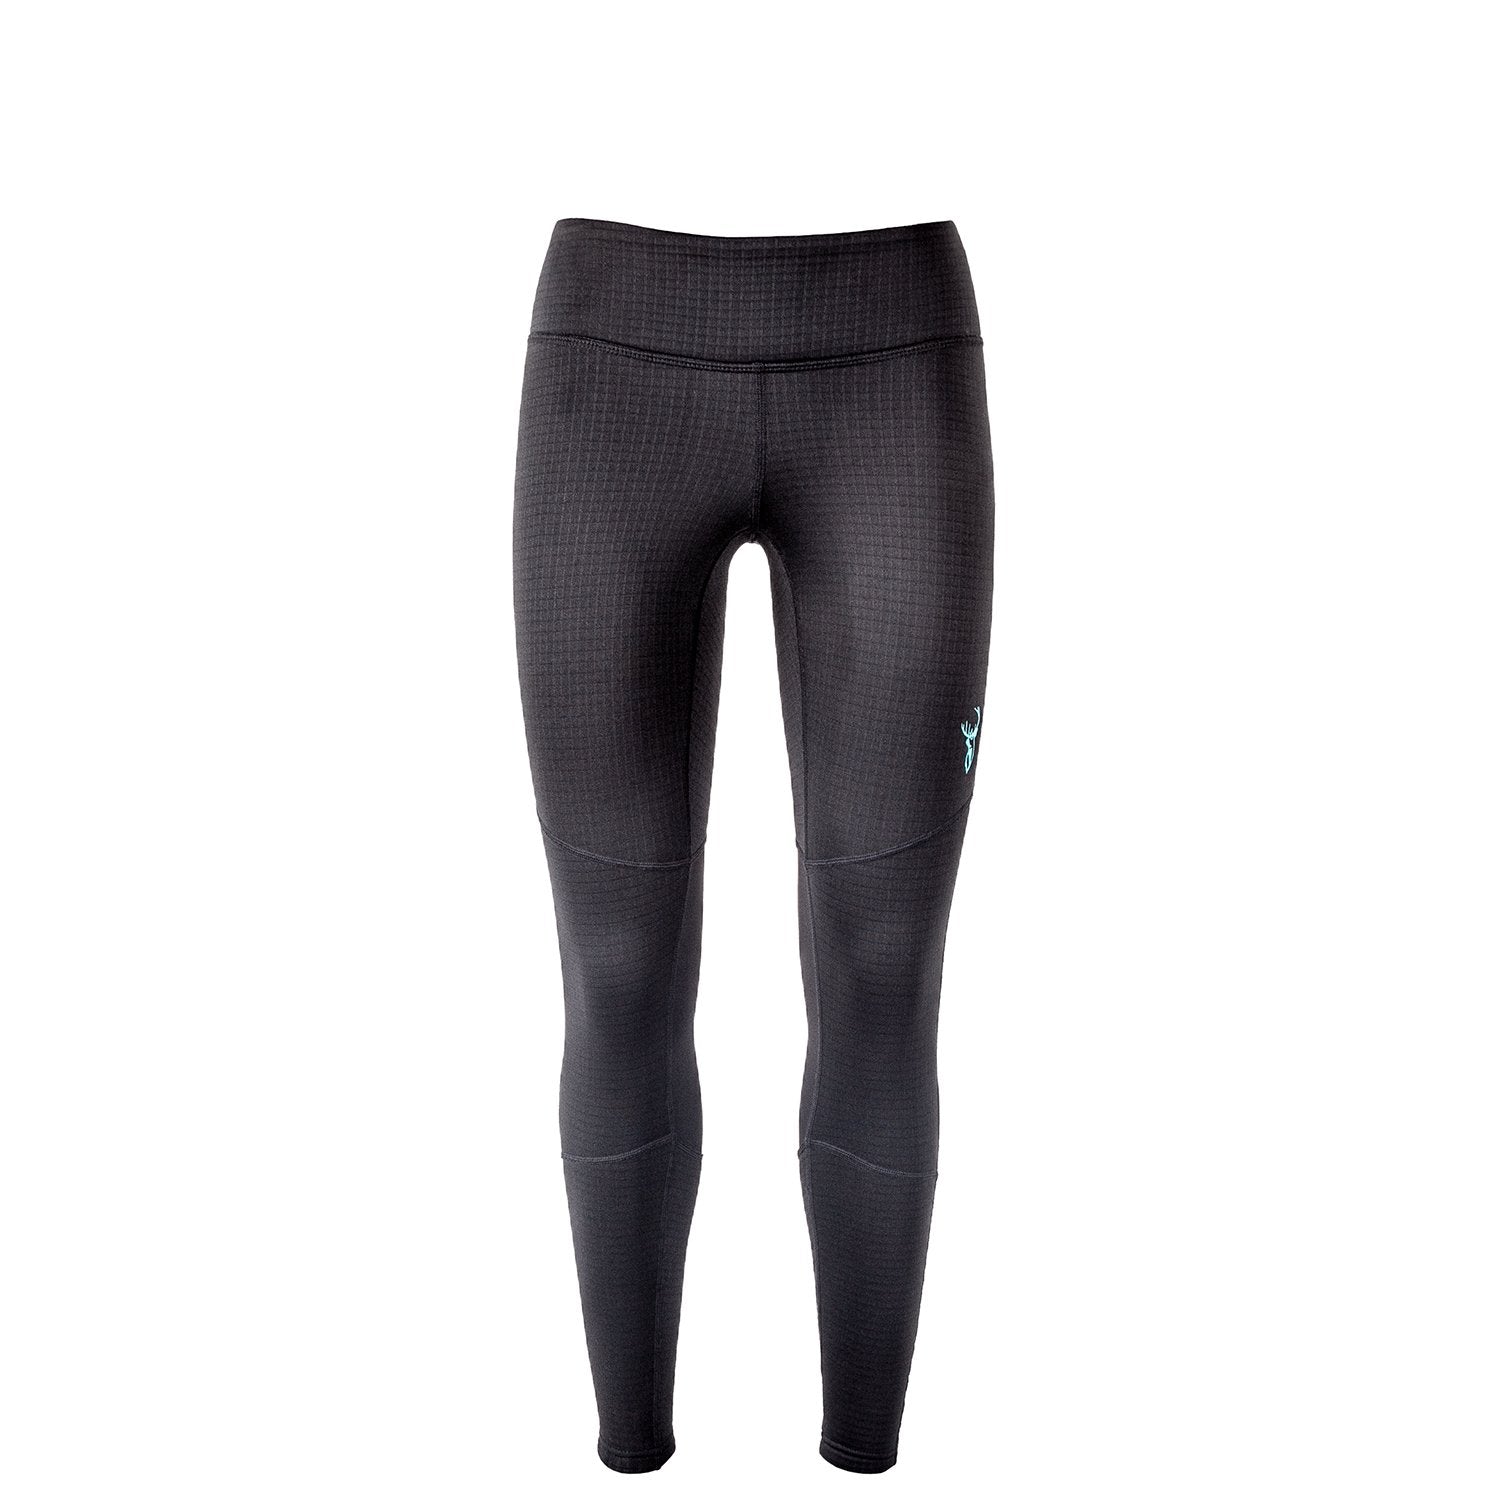 Hunters Element Womens Core+ Leggings Black - 8 - Mansfield Hunting & Fishing - Products to prepare for Corona Virus